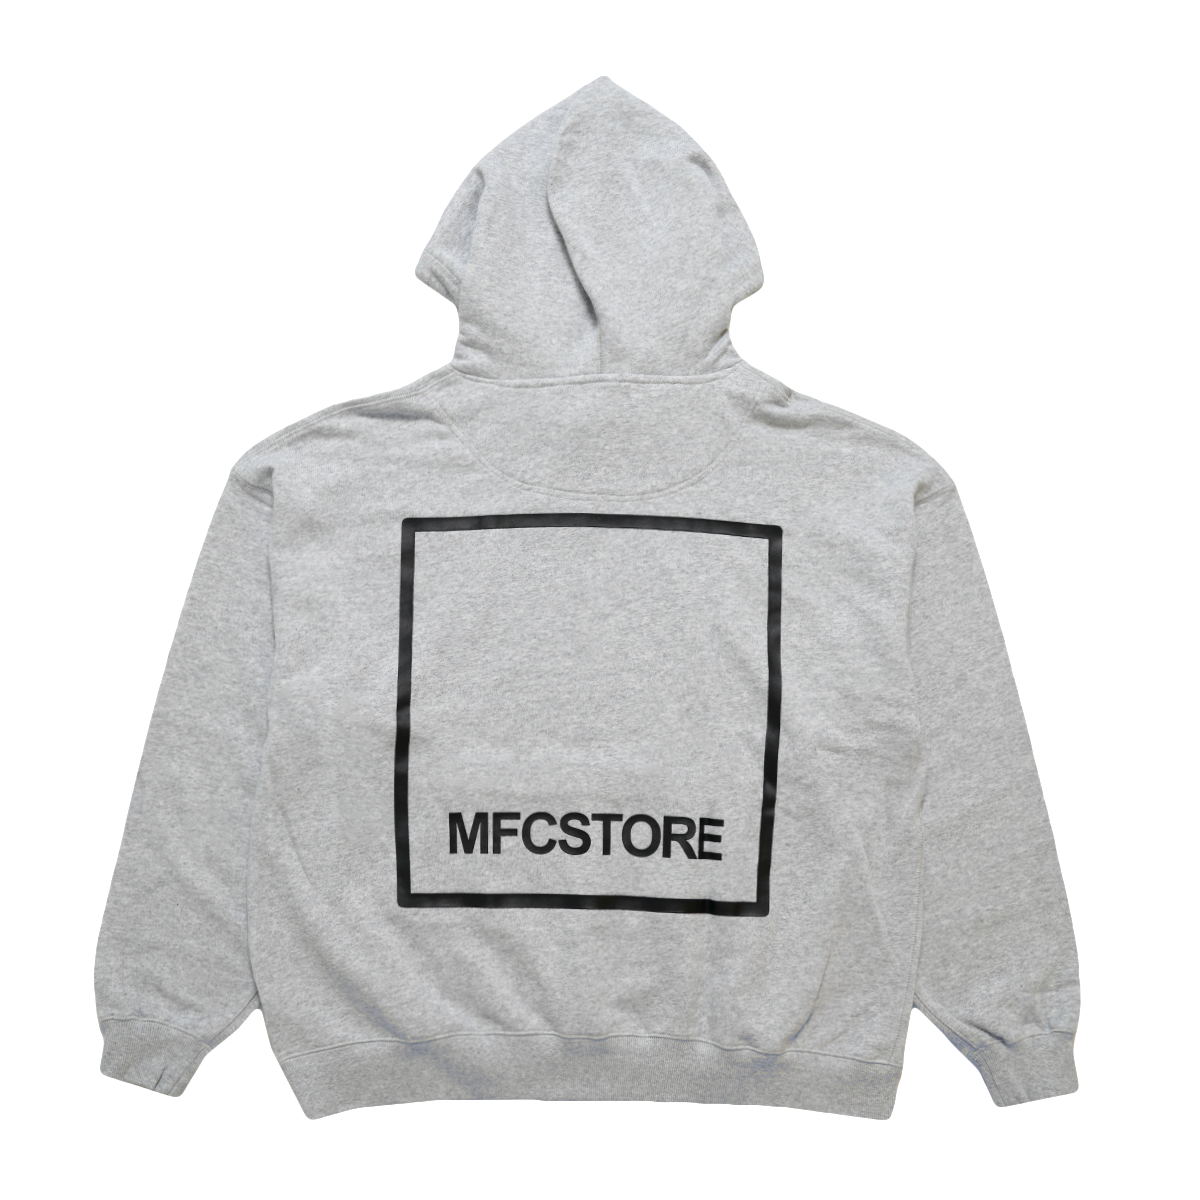 example mfcstore フーディーL